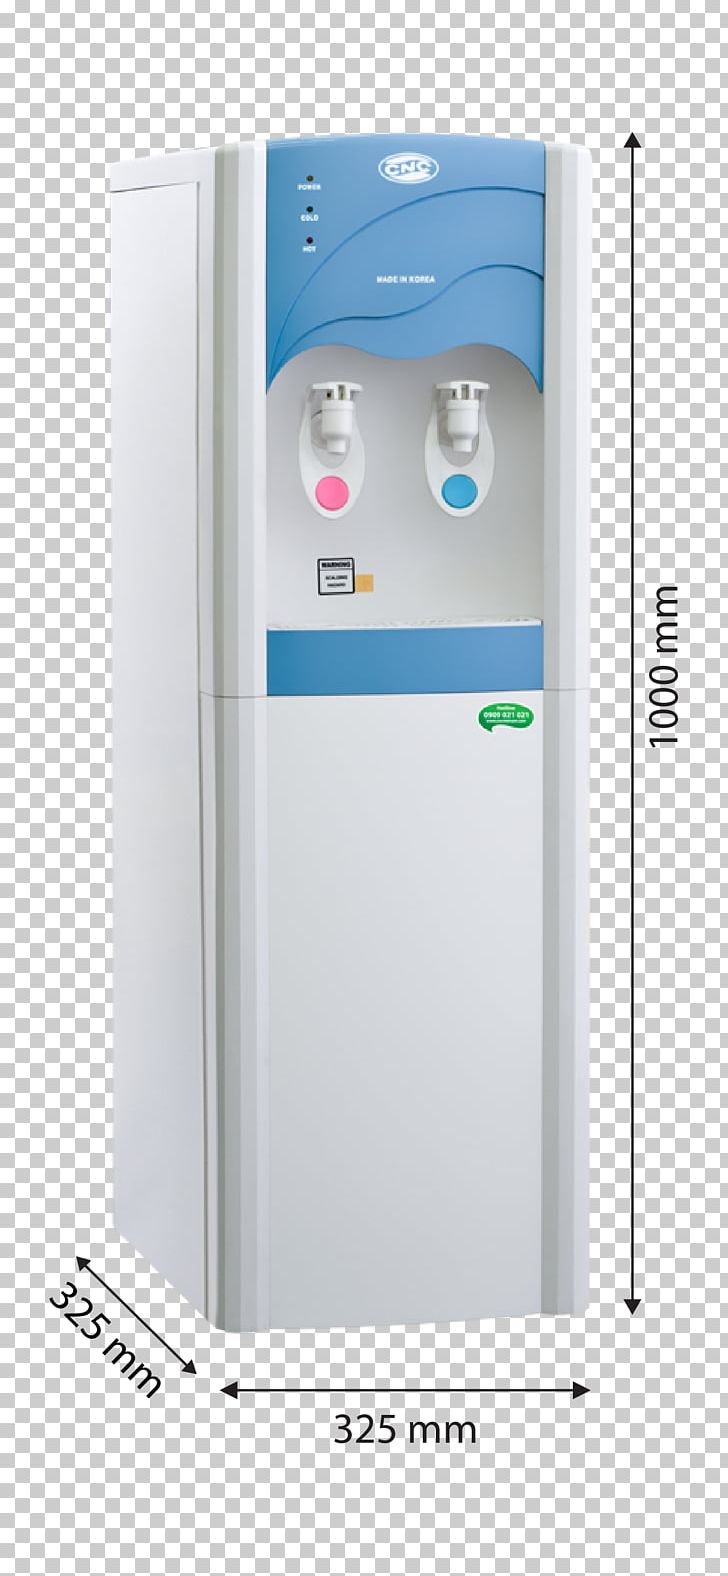 Refrigerator Water Cooler PNG, Clipart, Cooler, Electronics, Home Appliance, Kitchen Appliance, Major Appliance Free PNG Download